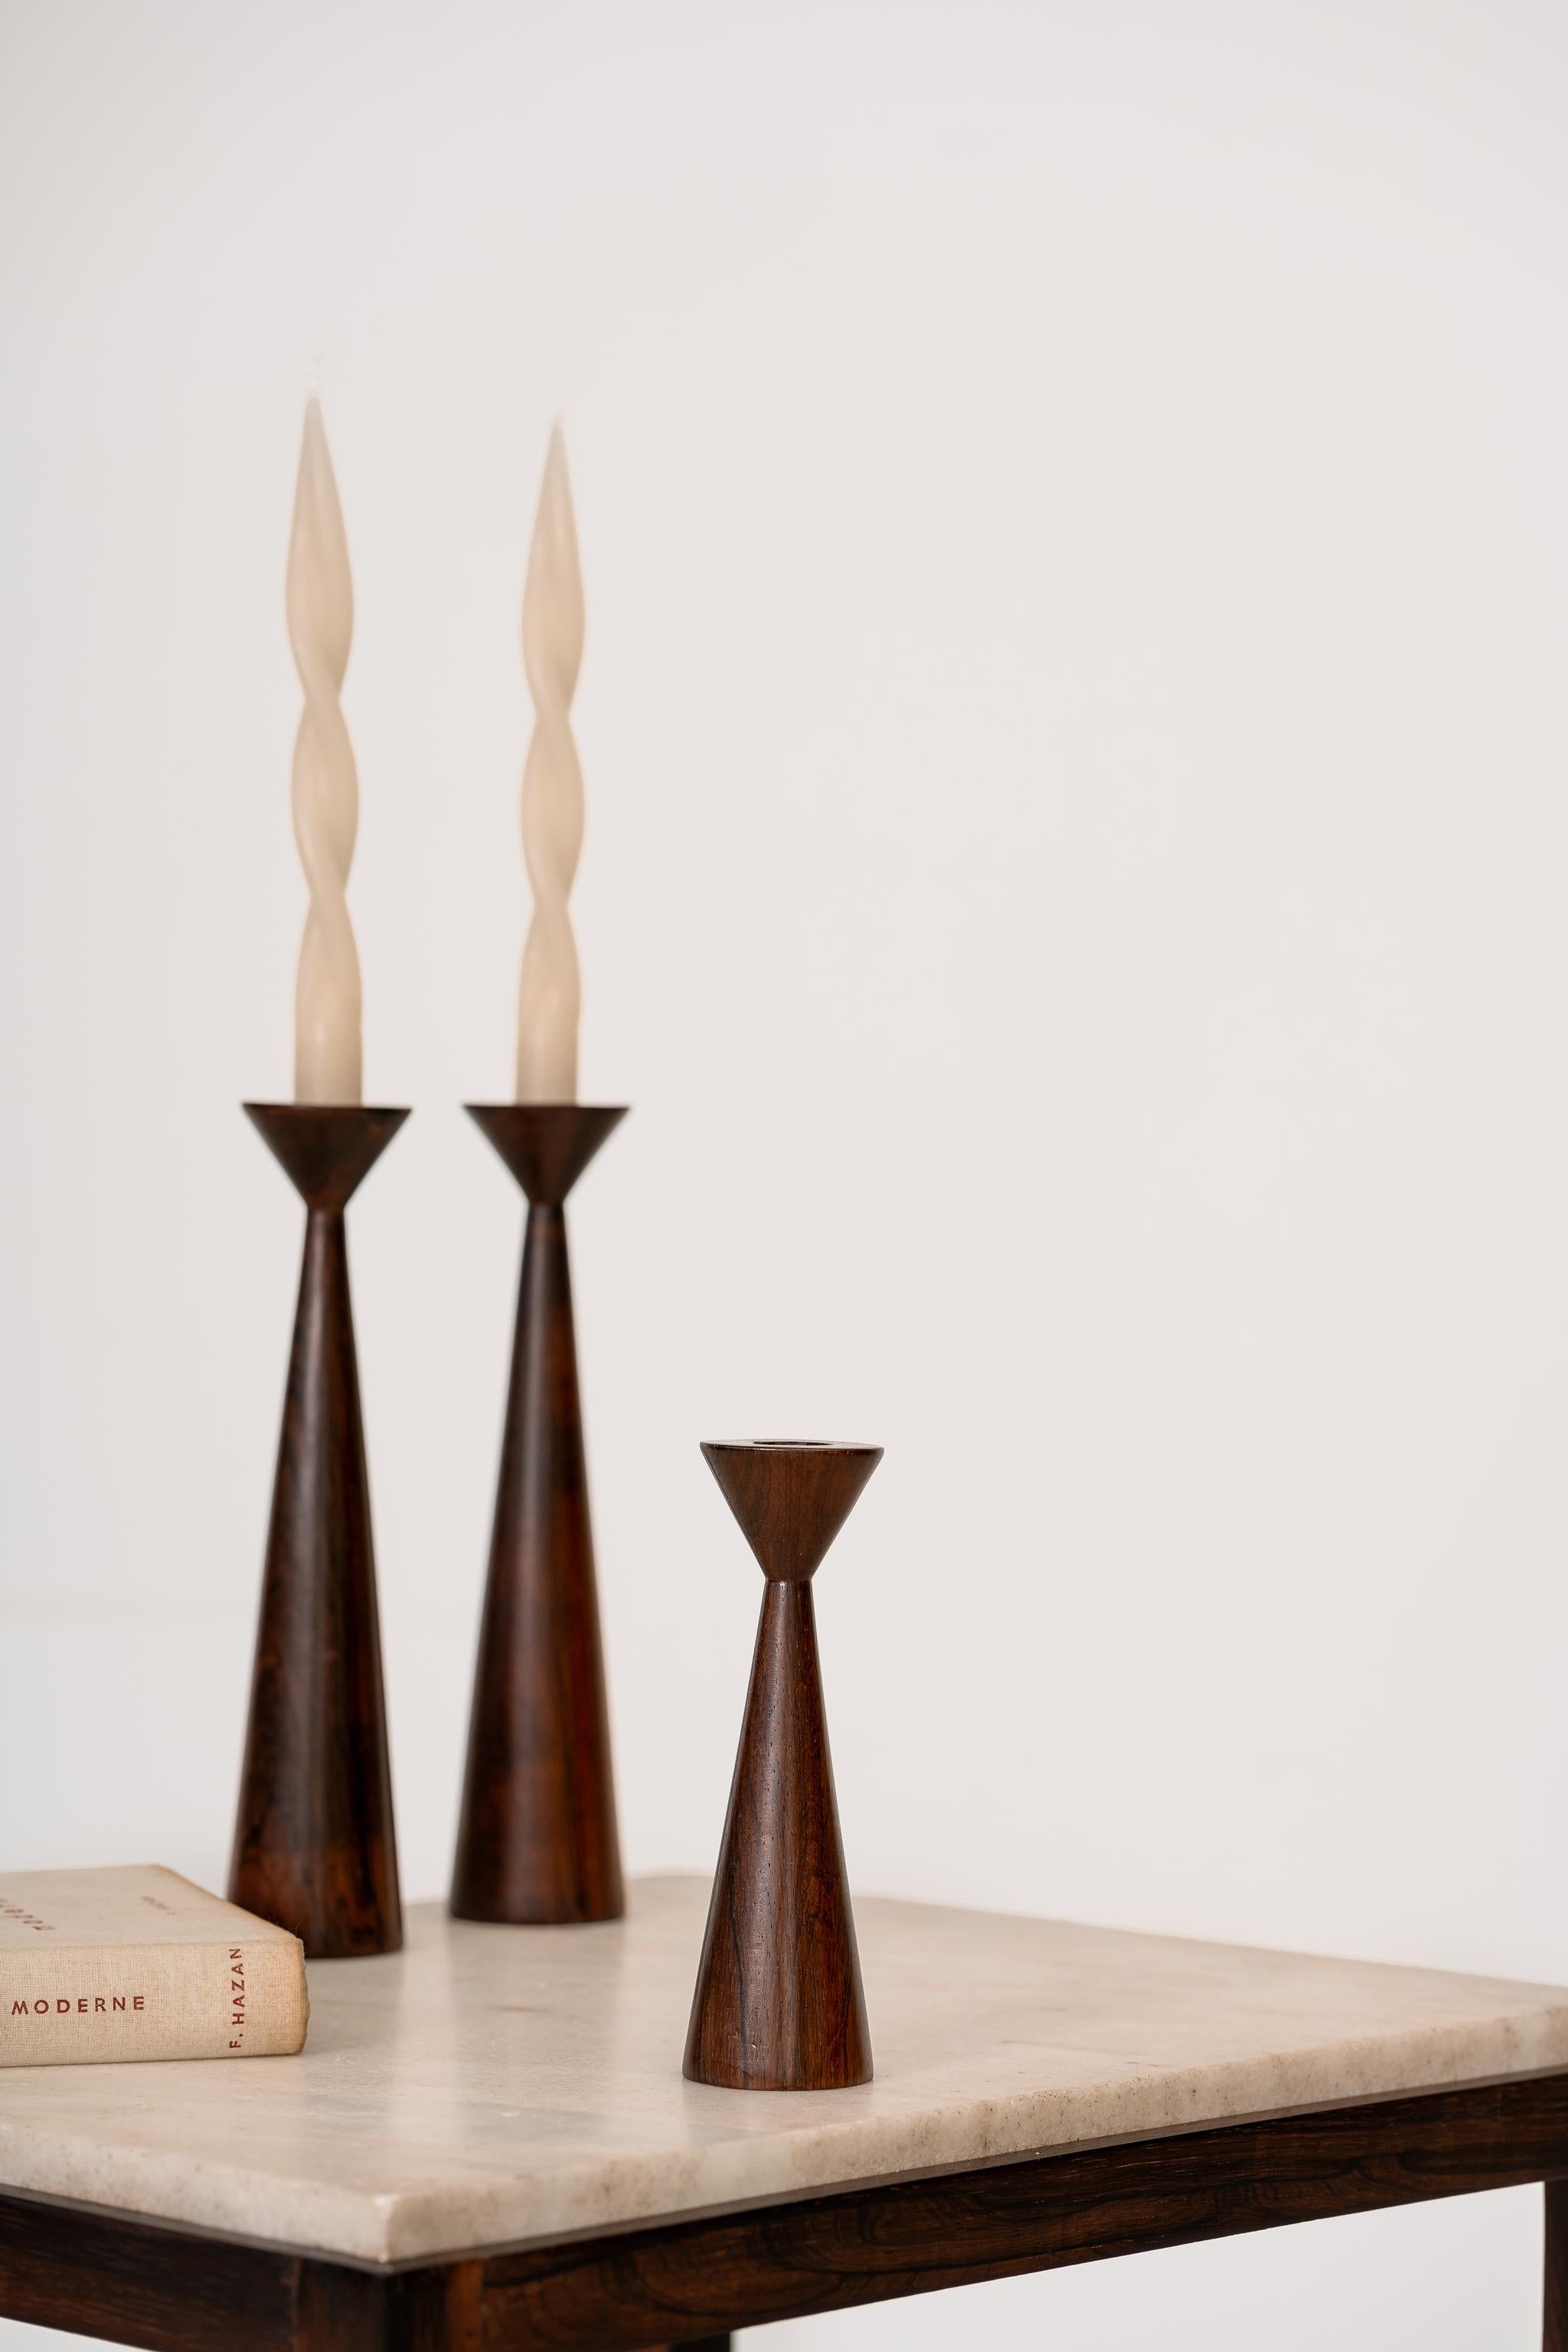 Stunning mid-century candlestick made in solid Brazilian rosewood of unknown authorship. It is the shortest in the group.